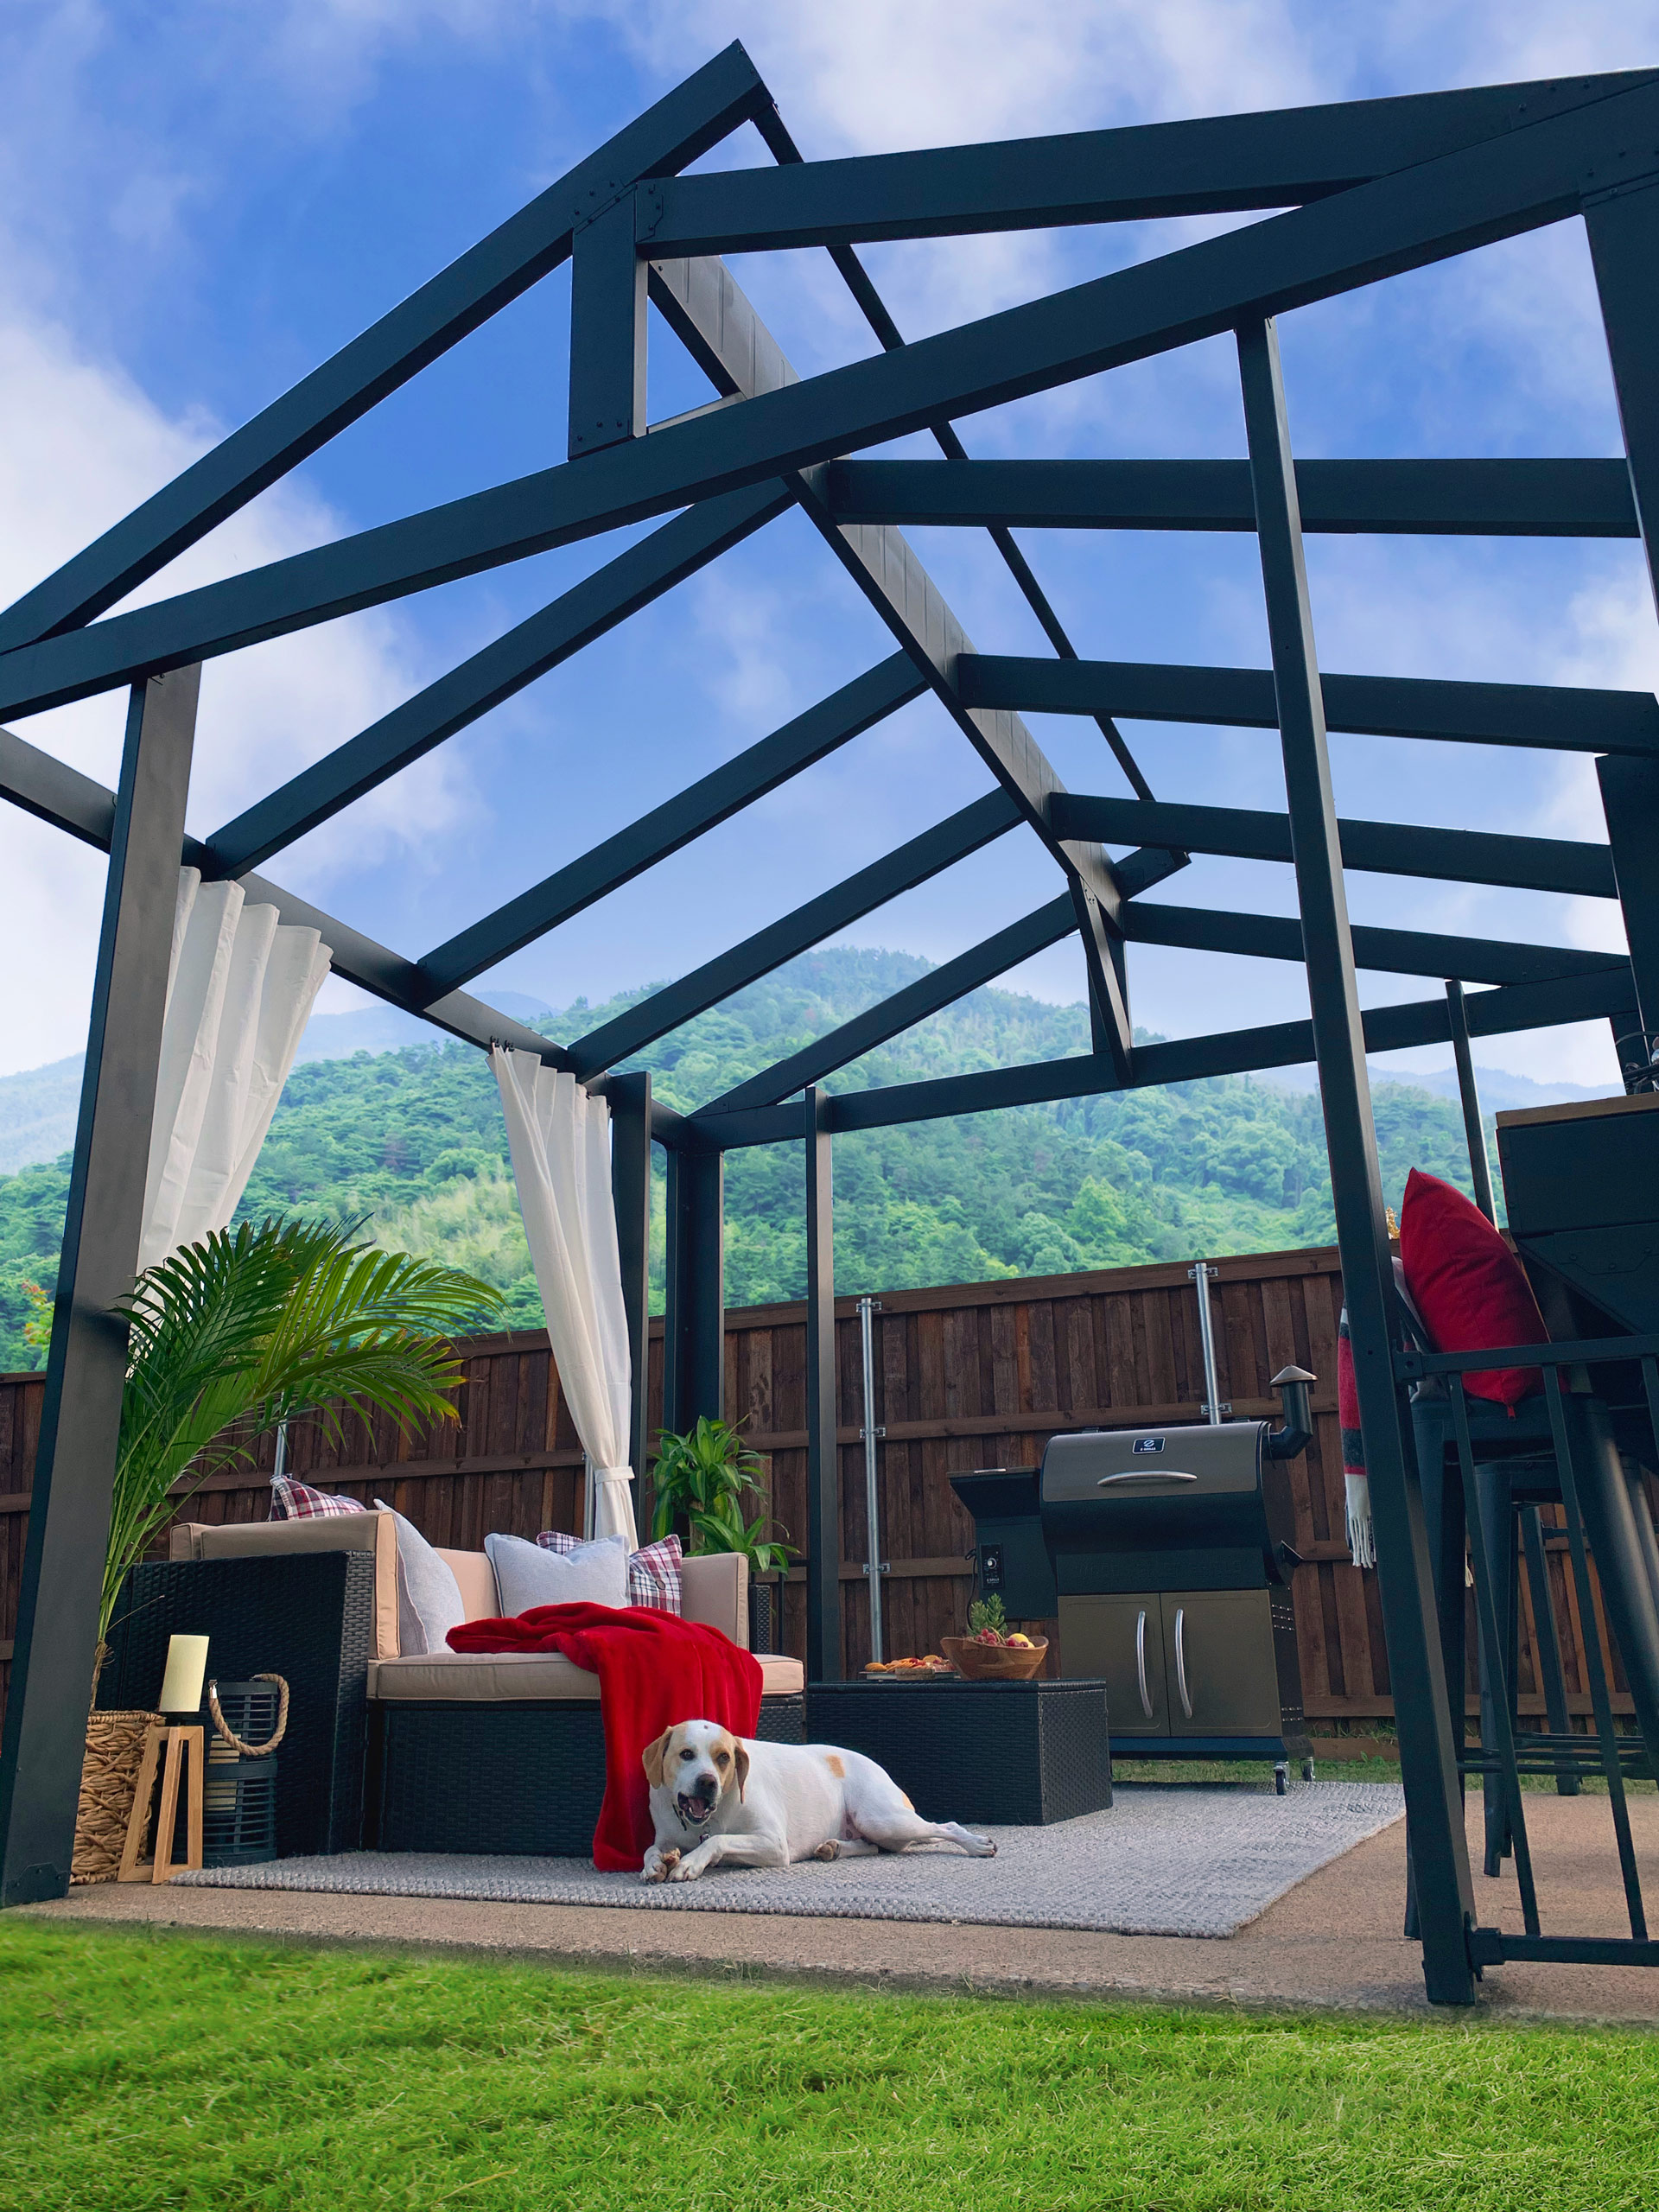 Steel pergola over an outdoor entertainment area with a dog relaxing on the rug in the shade and mountains in the background.